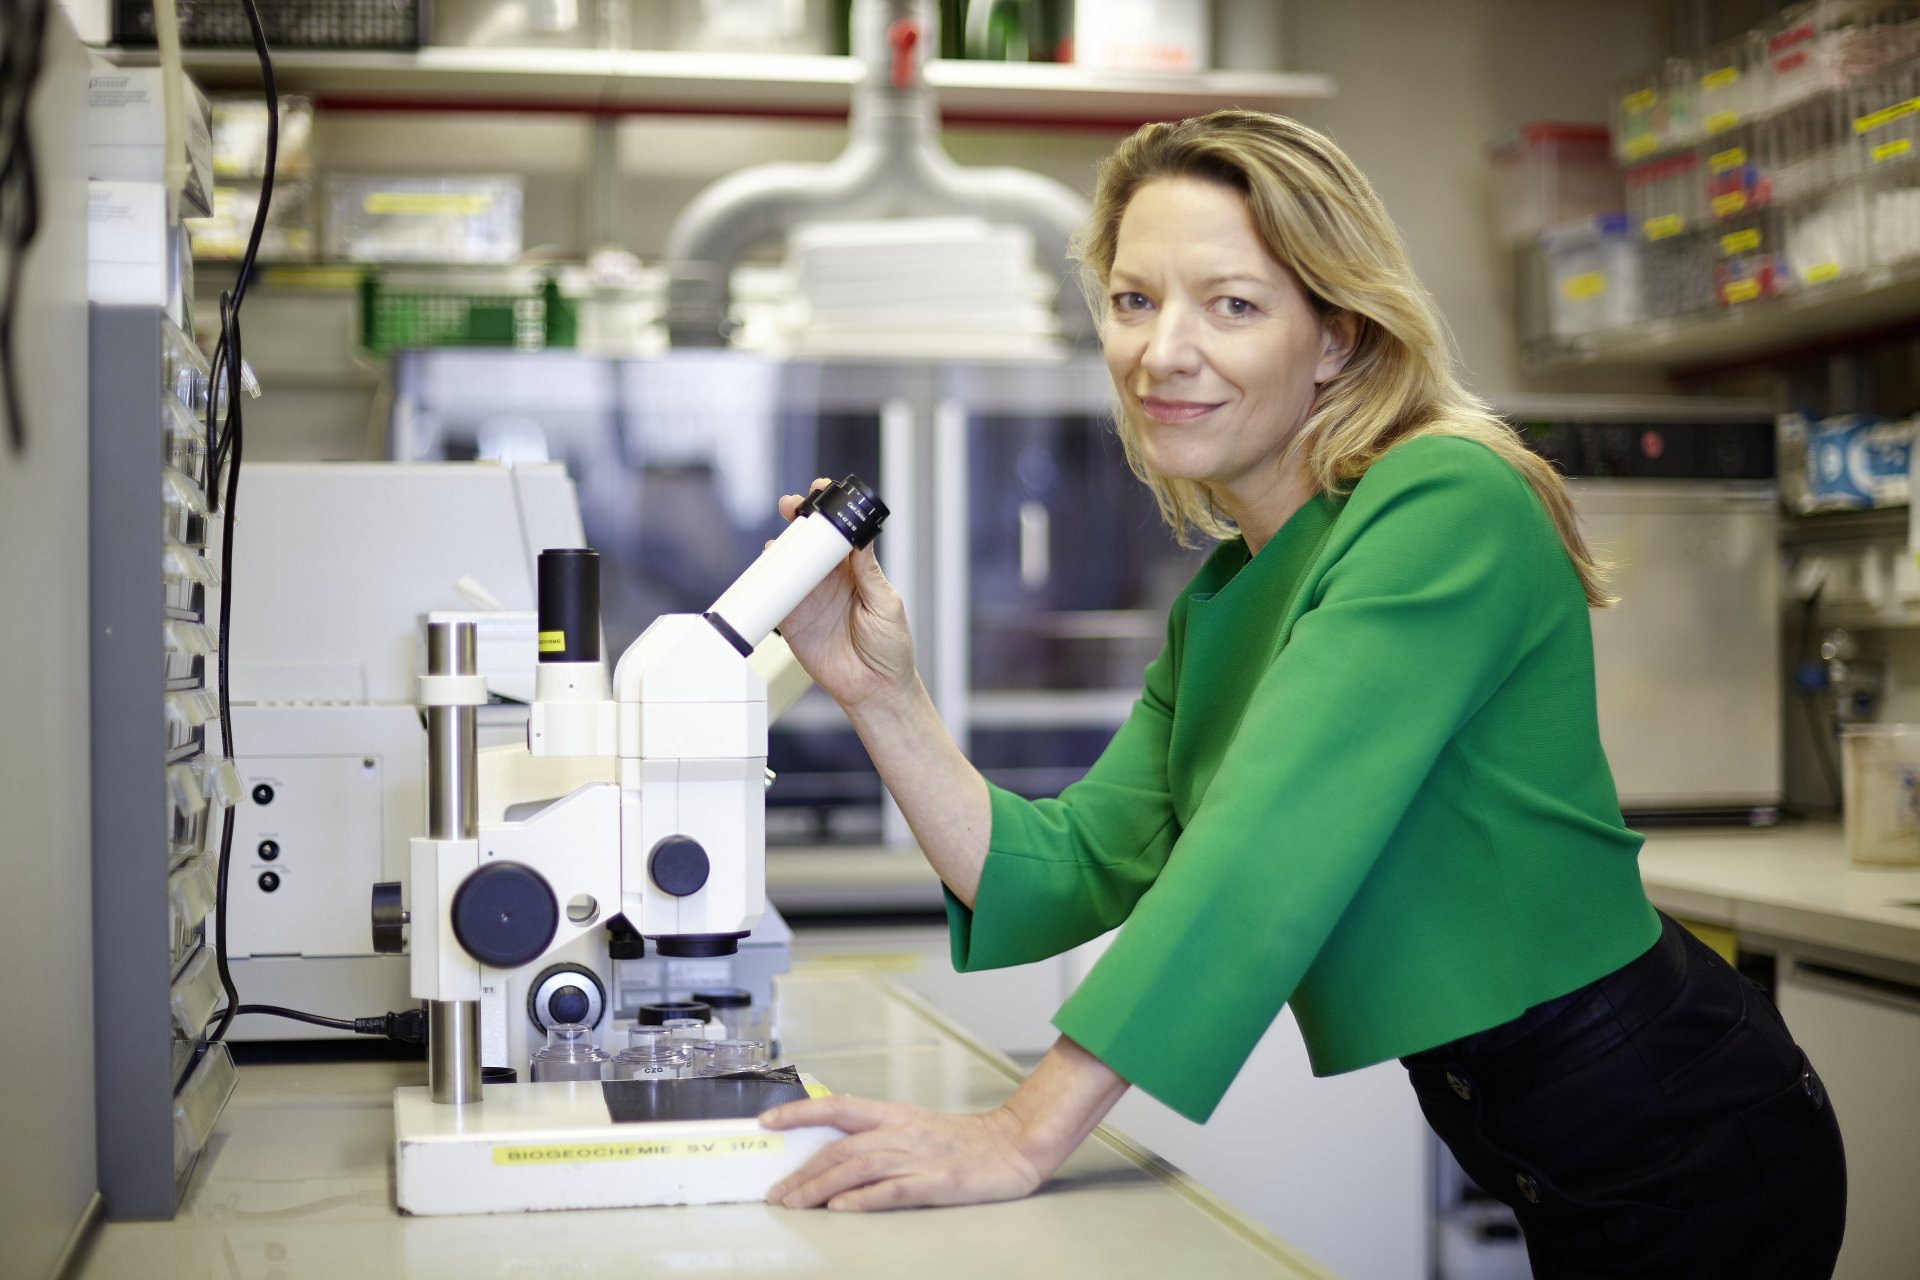 Antje Boetius, Director of the Alfred Wegener Institute, Helmholtz Centre for Polar and Marine Research (AWI), and Group Leader at the Max Planck Institute for Marine Microbiology. (Photo: Jan Riephoff)